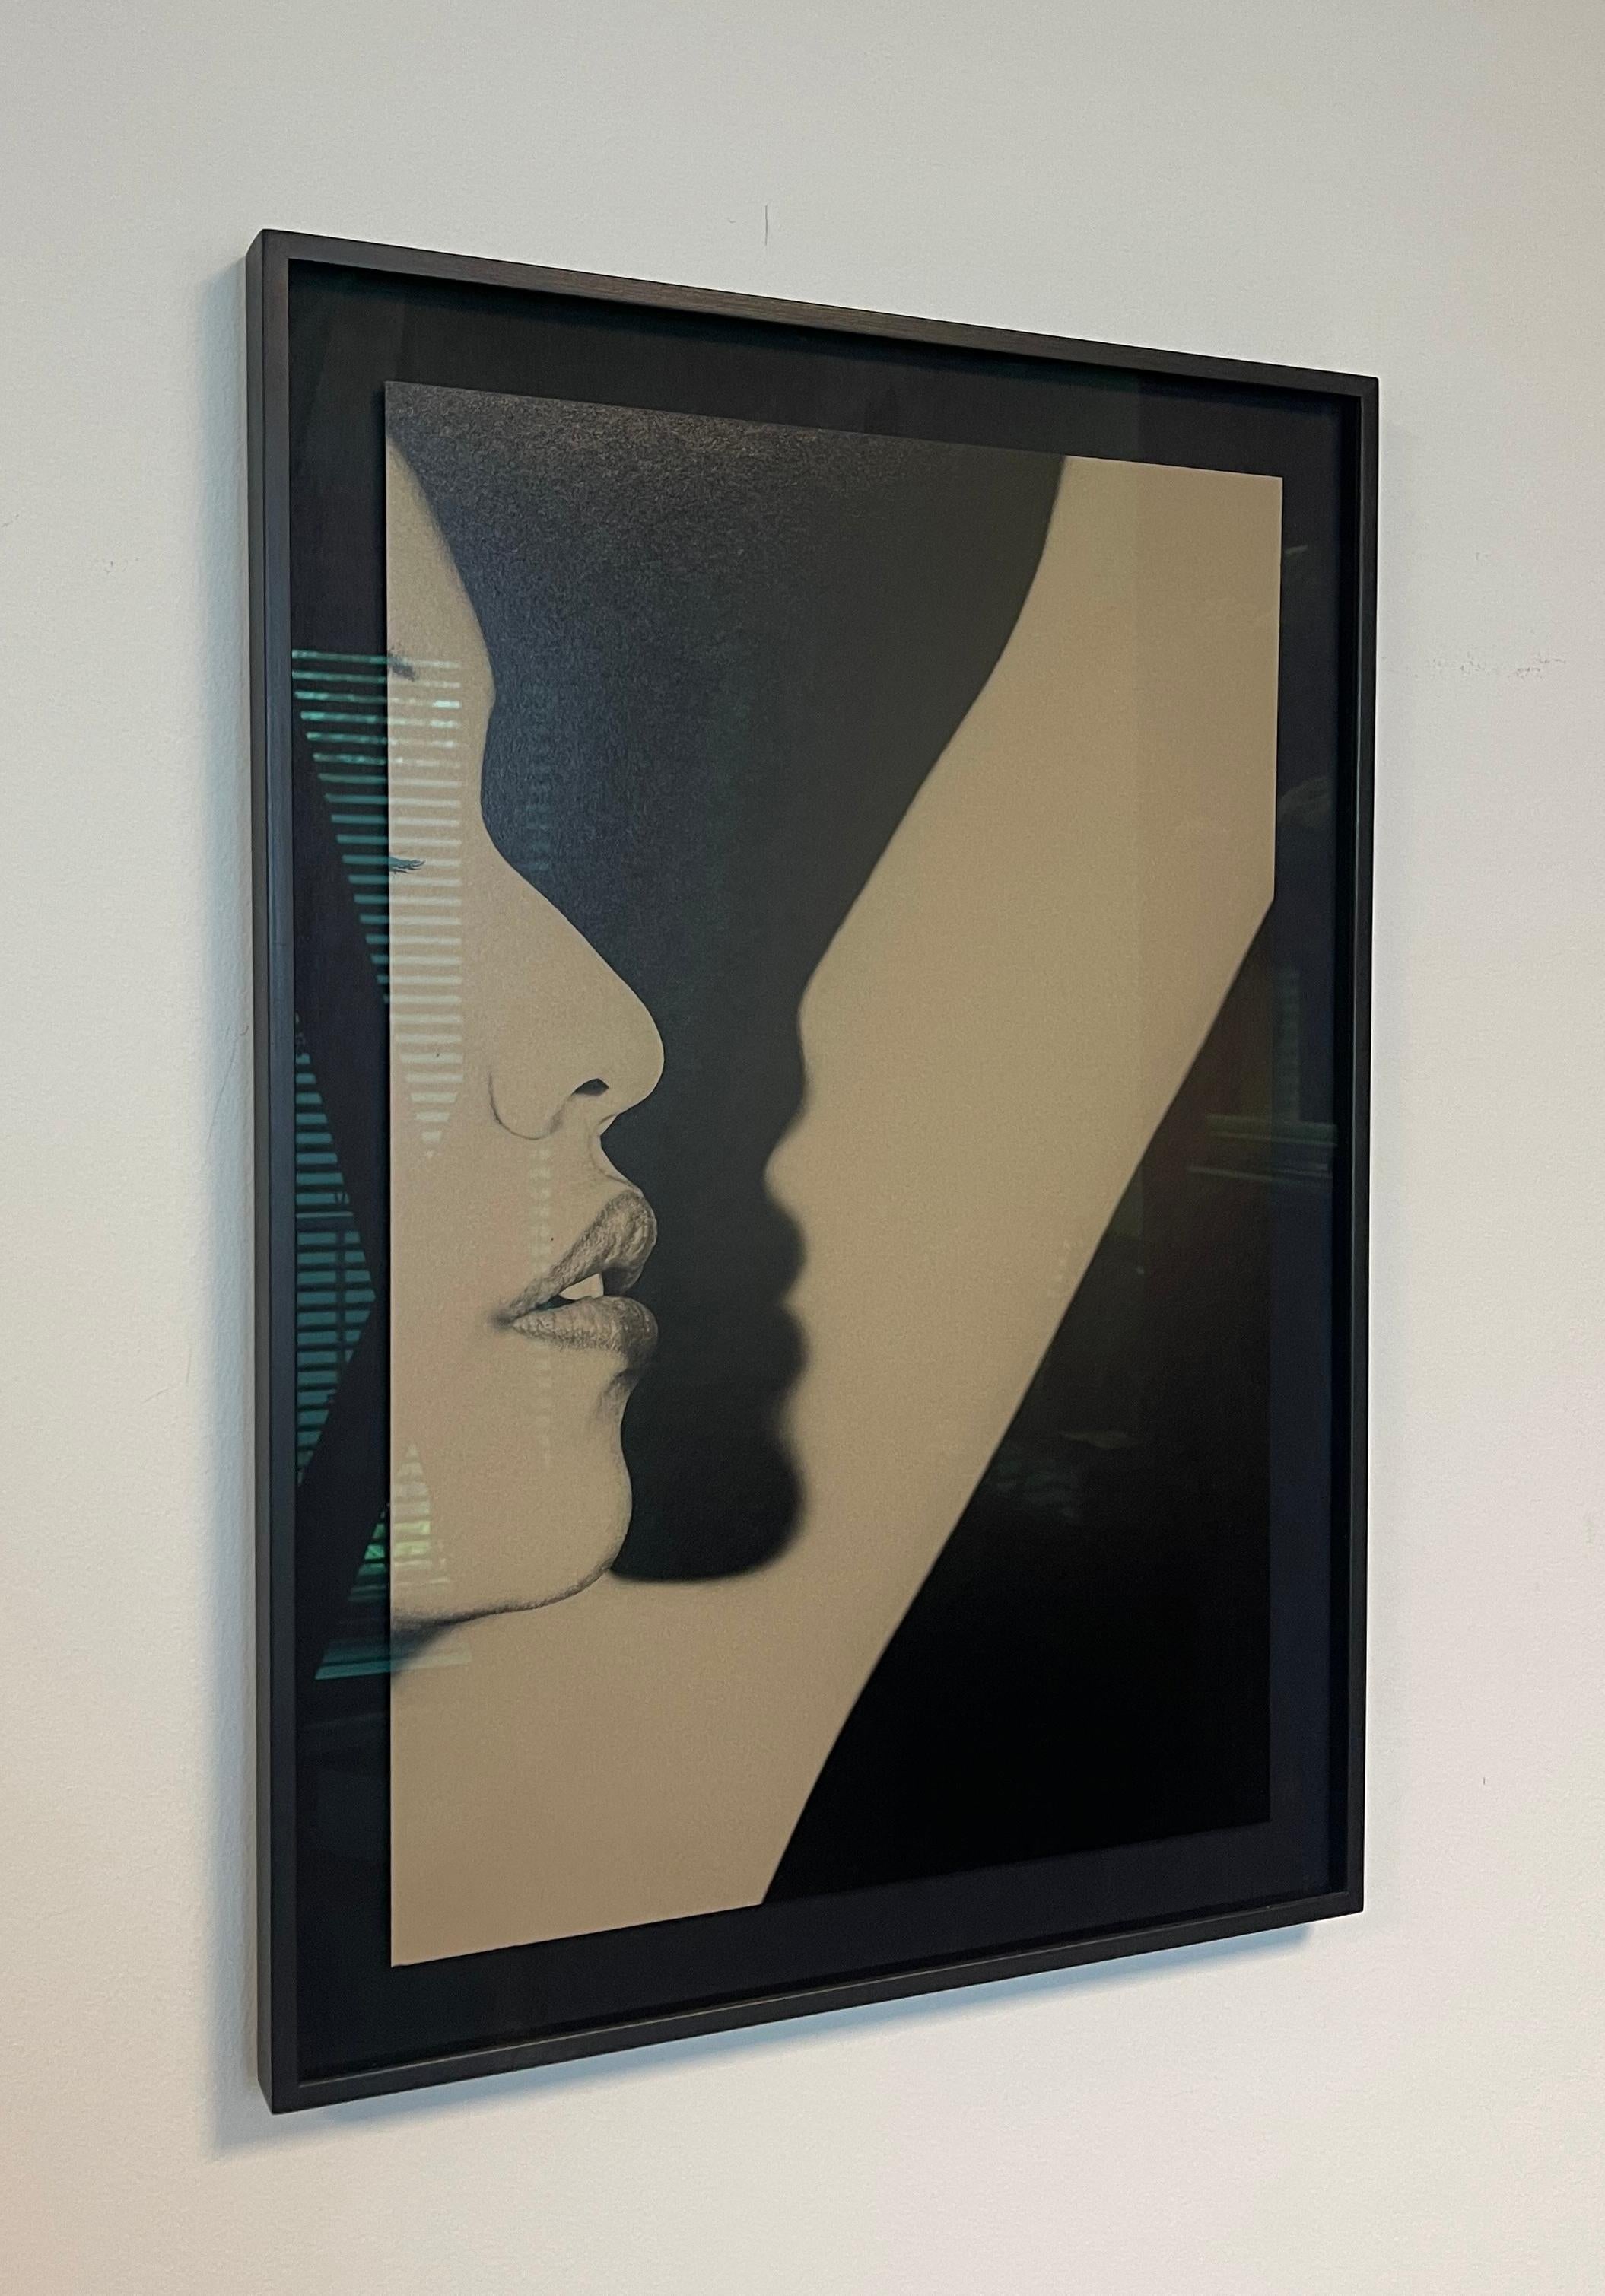 Limited Edition of 3
Framed size 70 x 100 cm
All works are Archival Pigment prints, floating in an all black wooden frame behind museums glass. 
More sizes on request.

Sara Punt's work is characterized by strong black and white contrasts and bodies